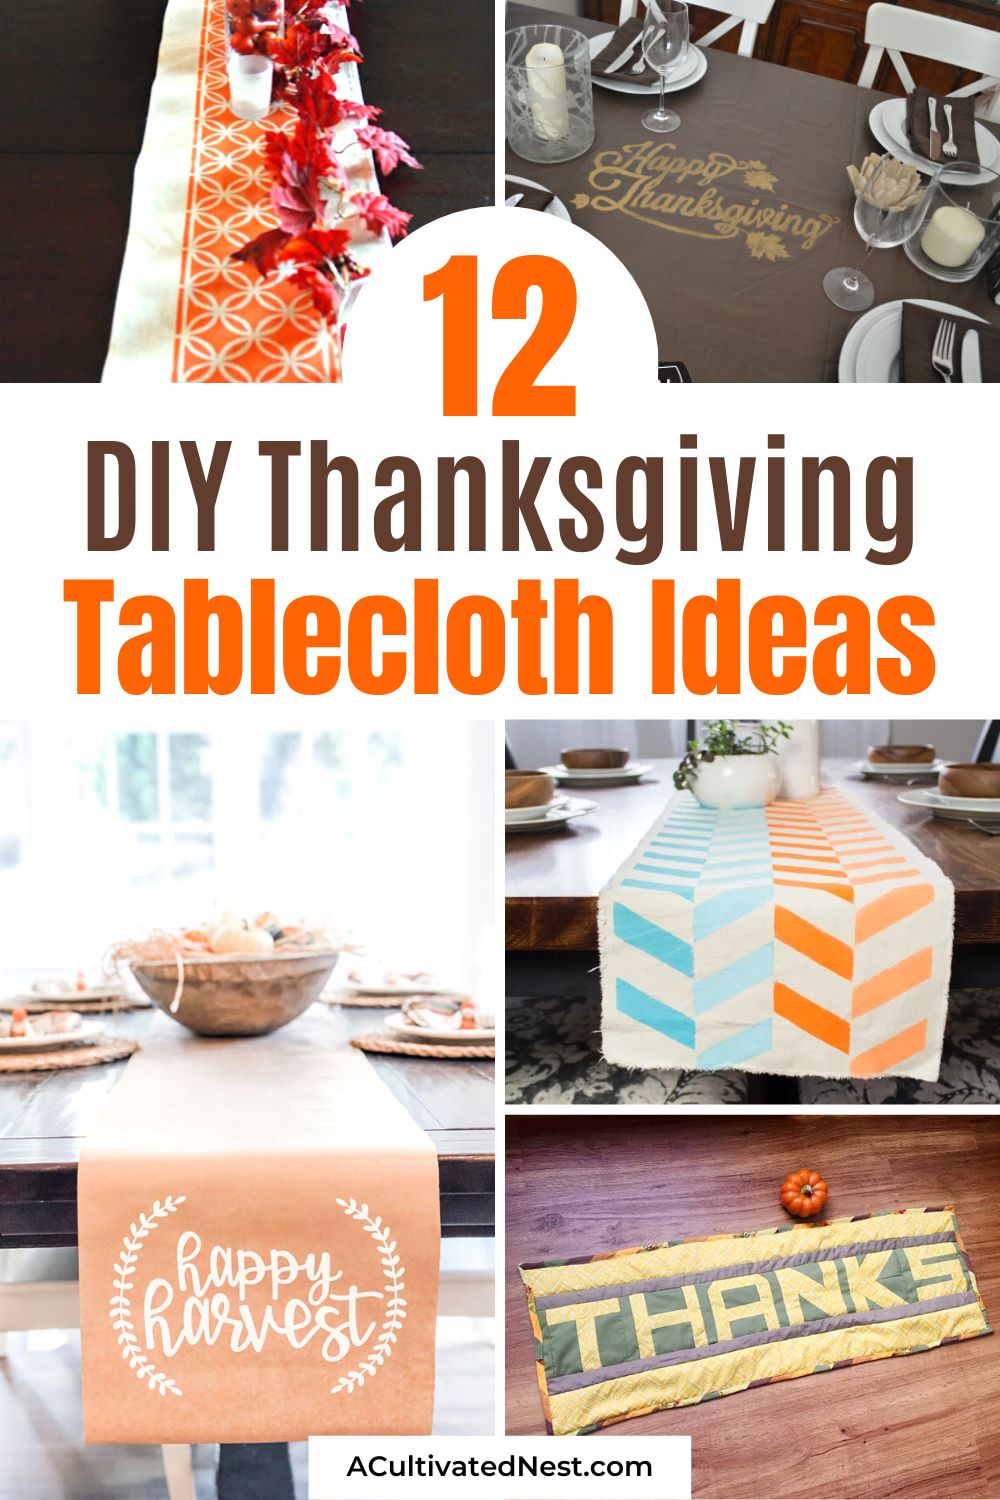 12 Gorgeous DIY Table Runners and Tablecloths for Thanksgiving- Make your Thanksgiving table shine! Discover beautiful DIY table runner and tablecloth ideas to adorn your holiday spread. From rustic to elegant, these creations will make your Thanksgiving gathering truly special. | #ThanksgivingDIY #DIY #sewing #tablecloth #ACultivatedNest